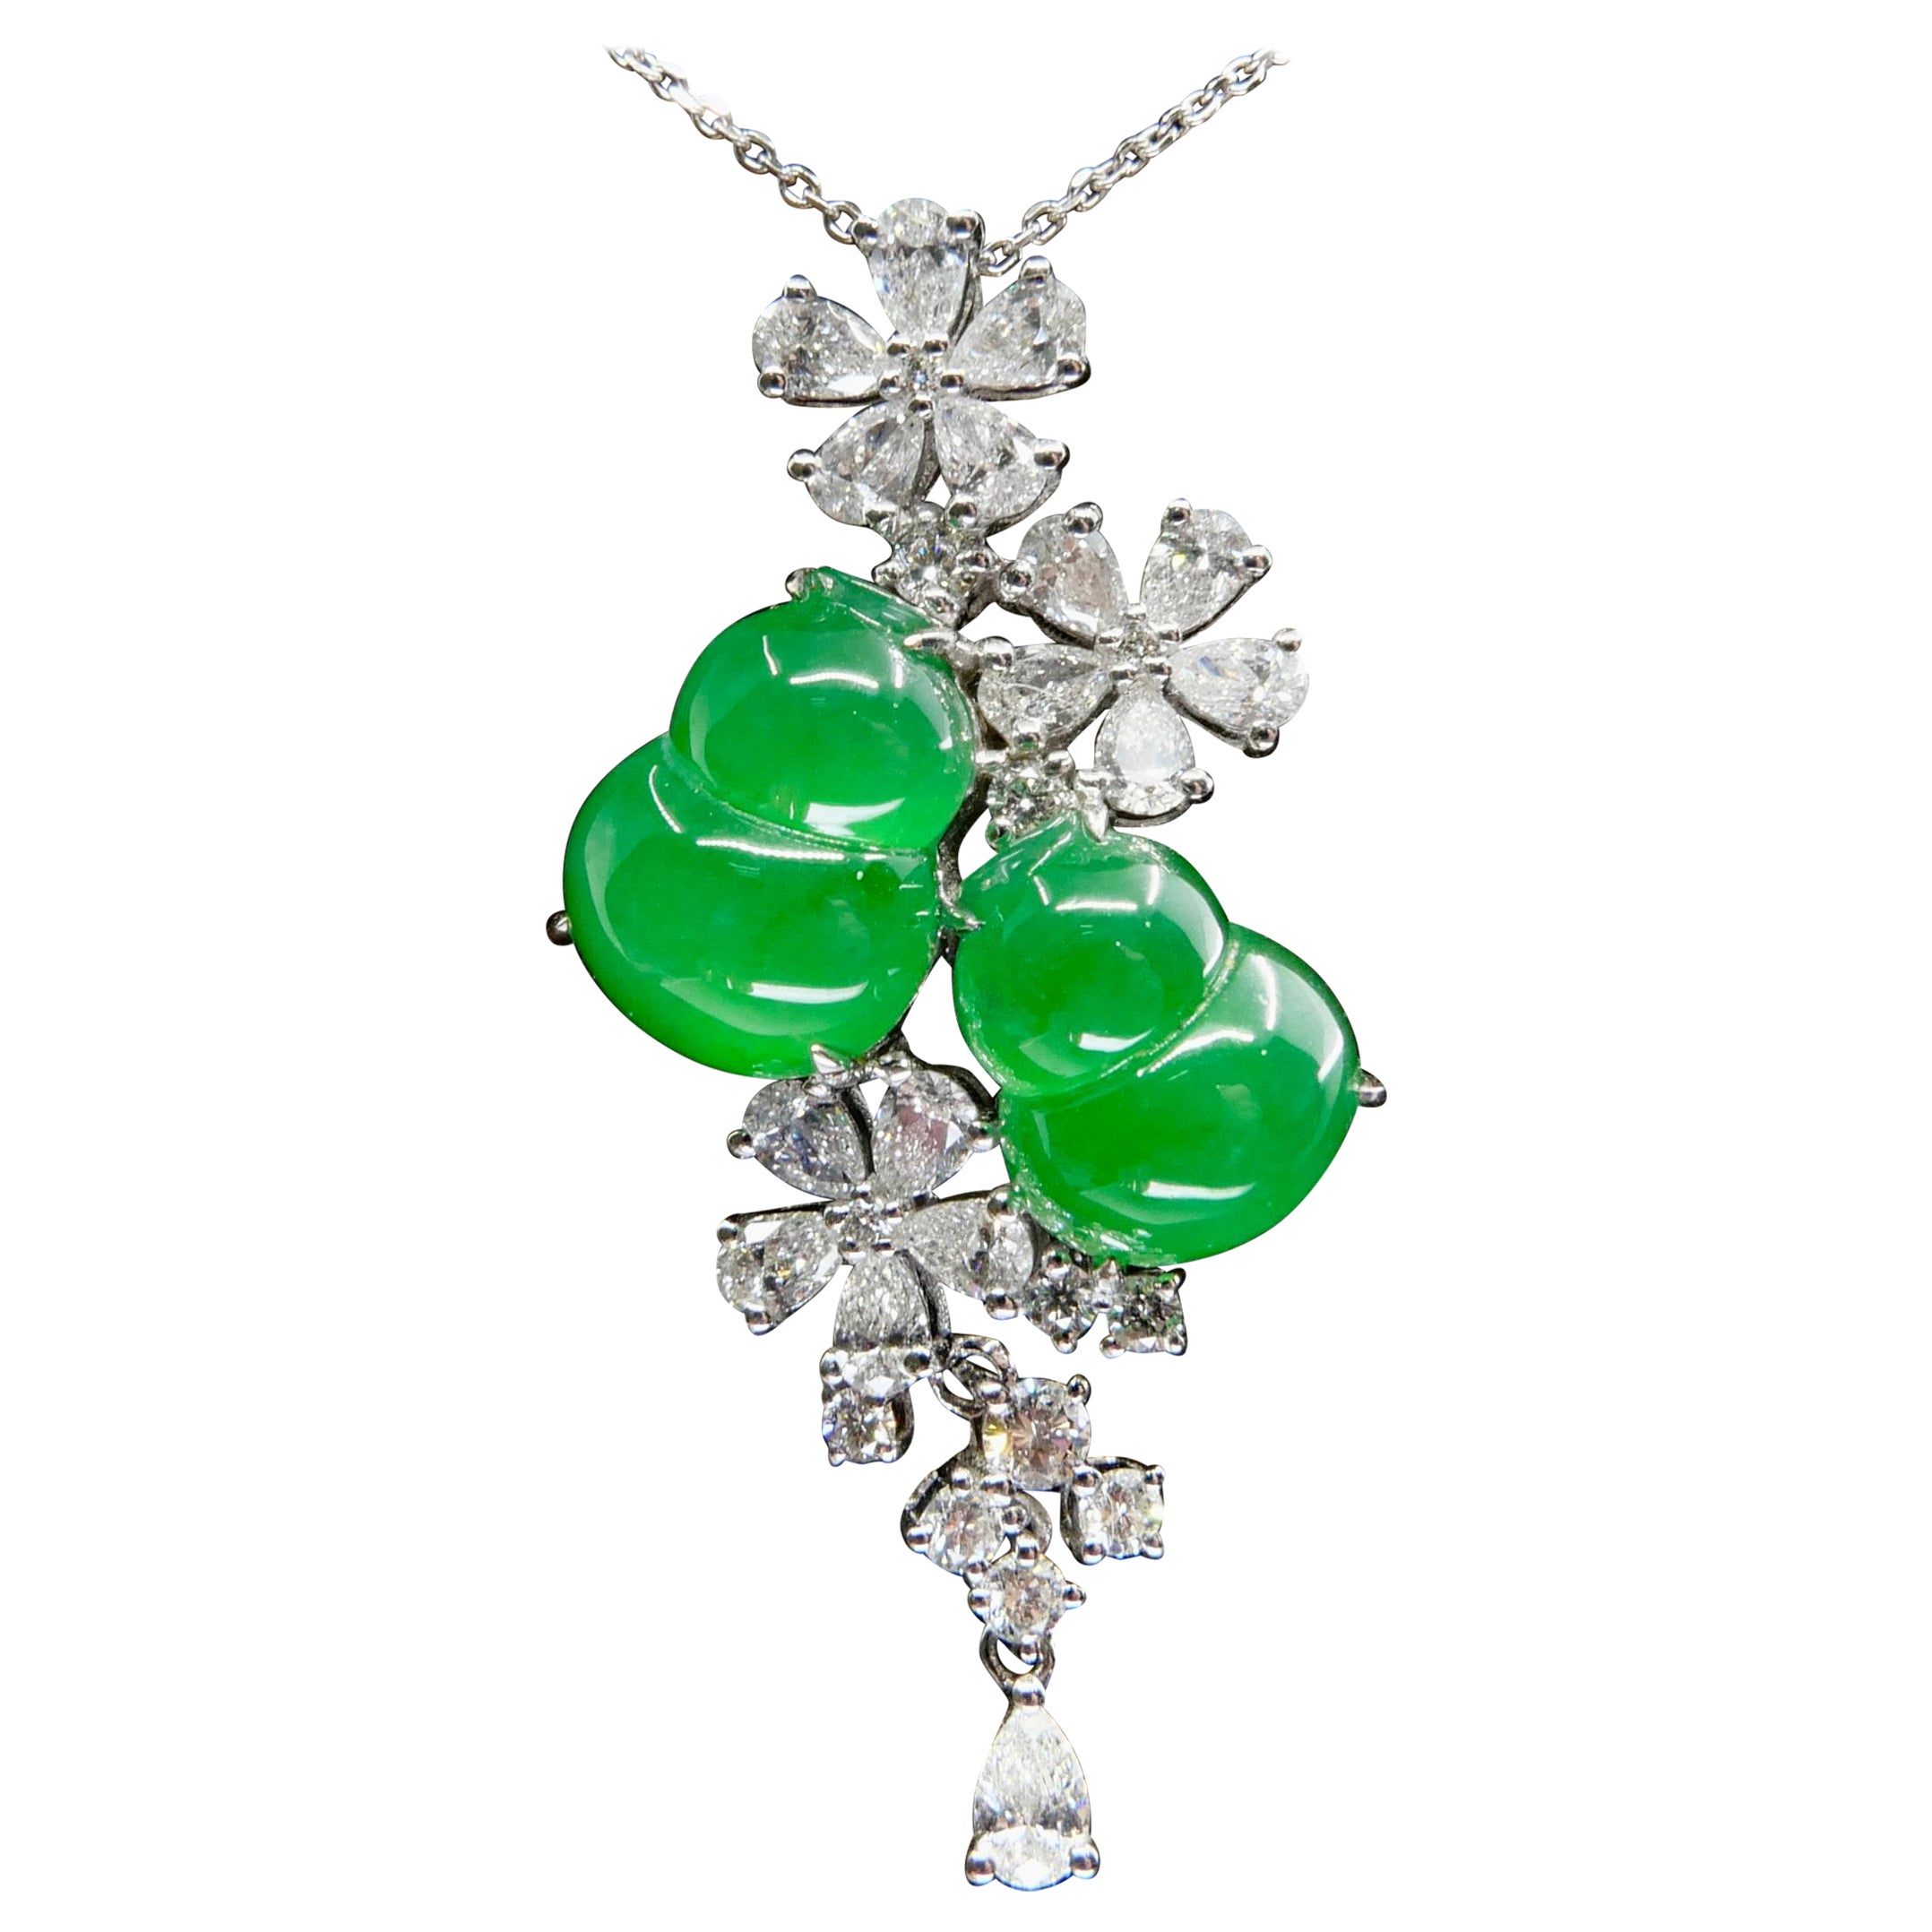 Certified Type A Icy Jade Gourd Diamond Pendant Necklace, Intense Apple Green For Sale